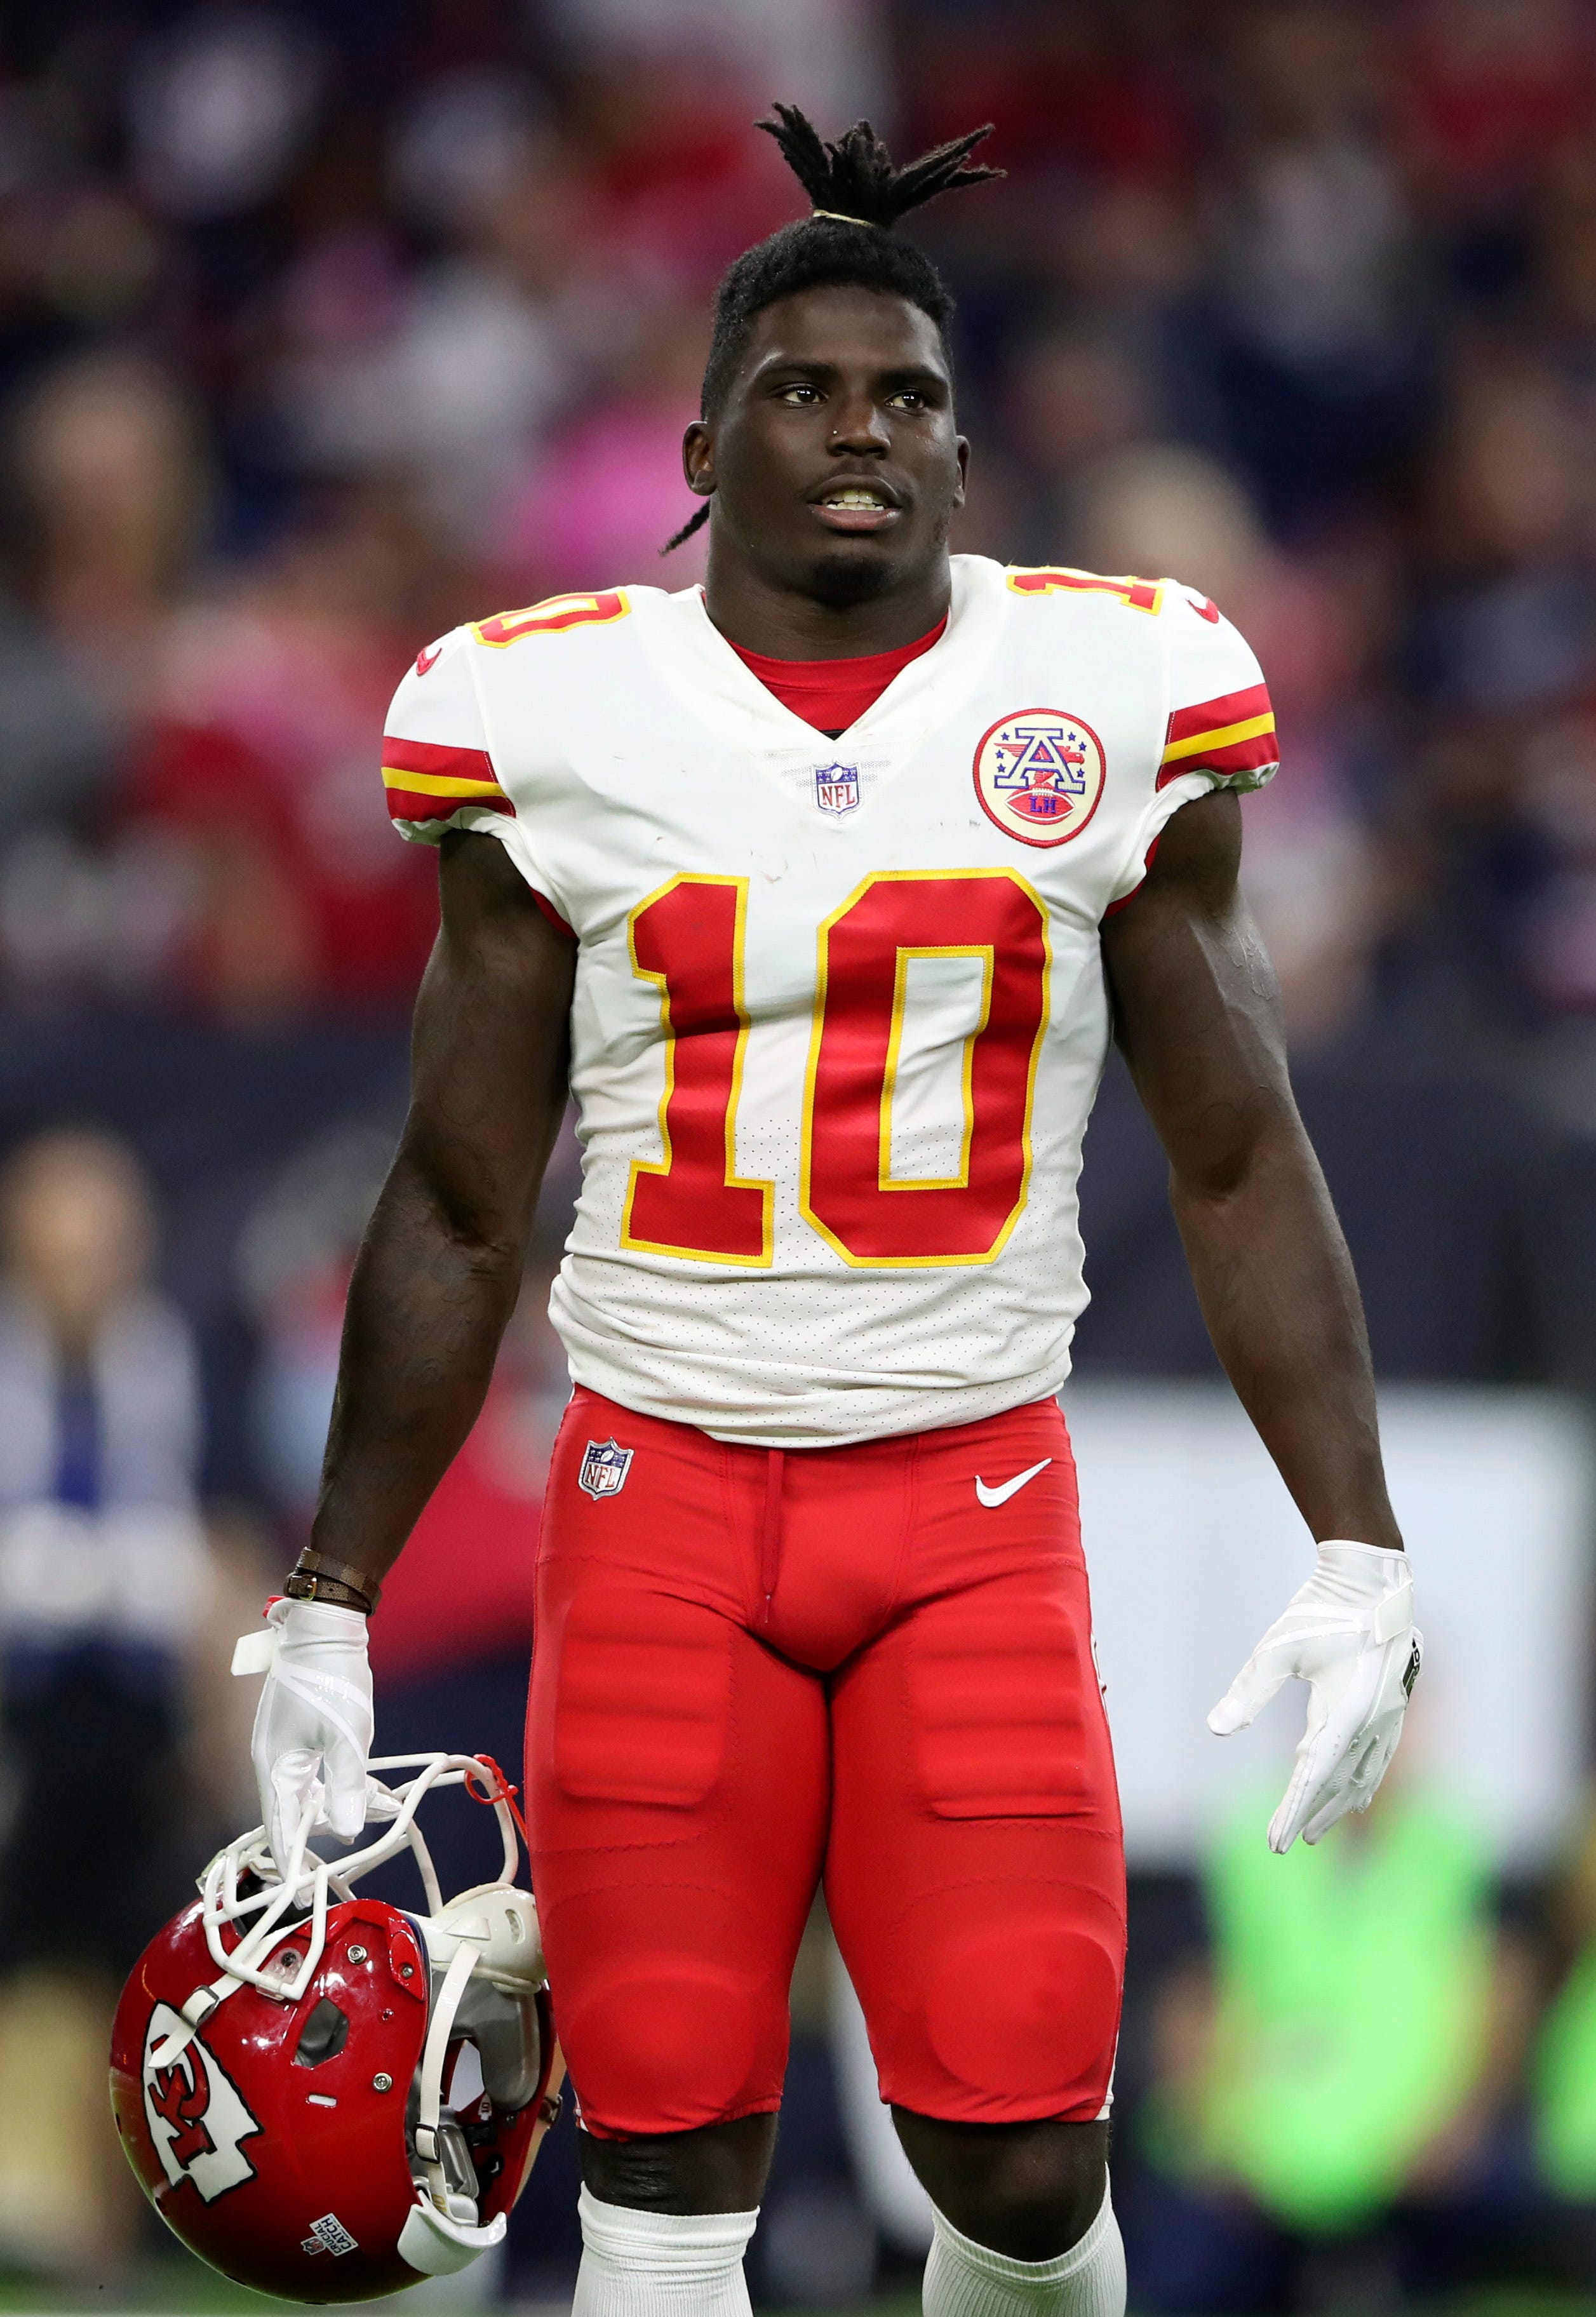 Chiefs' Tyreek Hill accused of hitting son, threatening fiancee in audio - TRENDING TOPIC